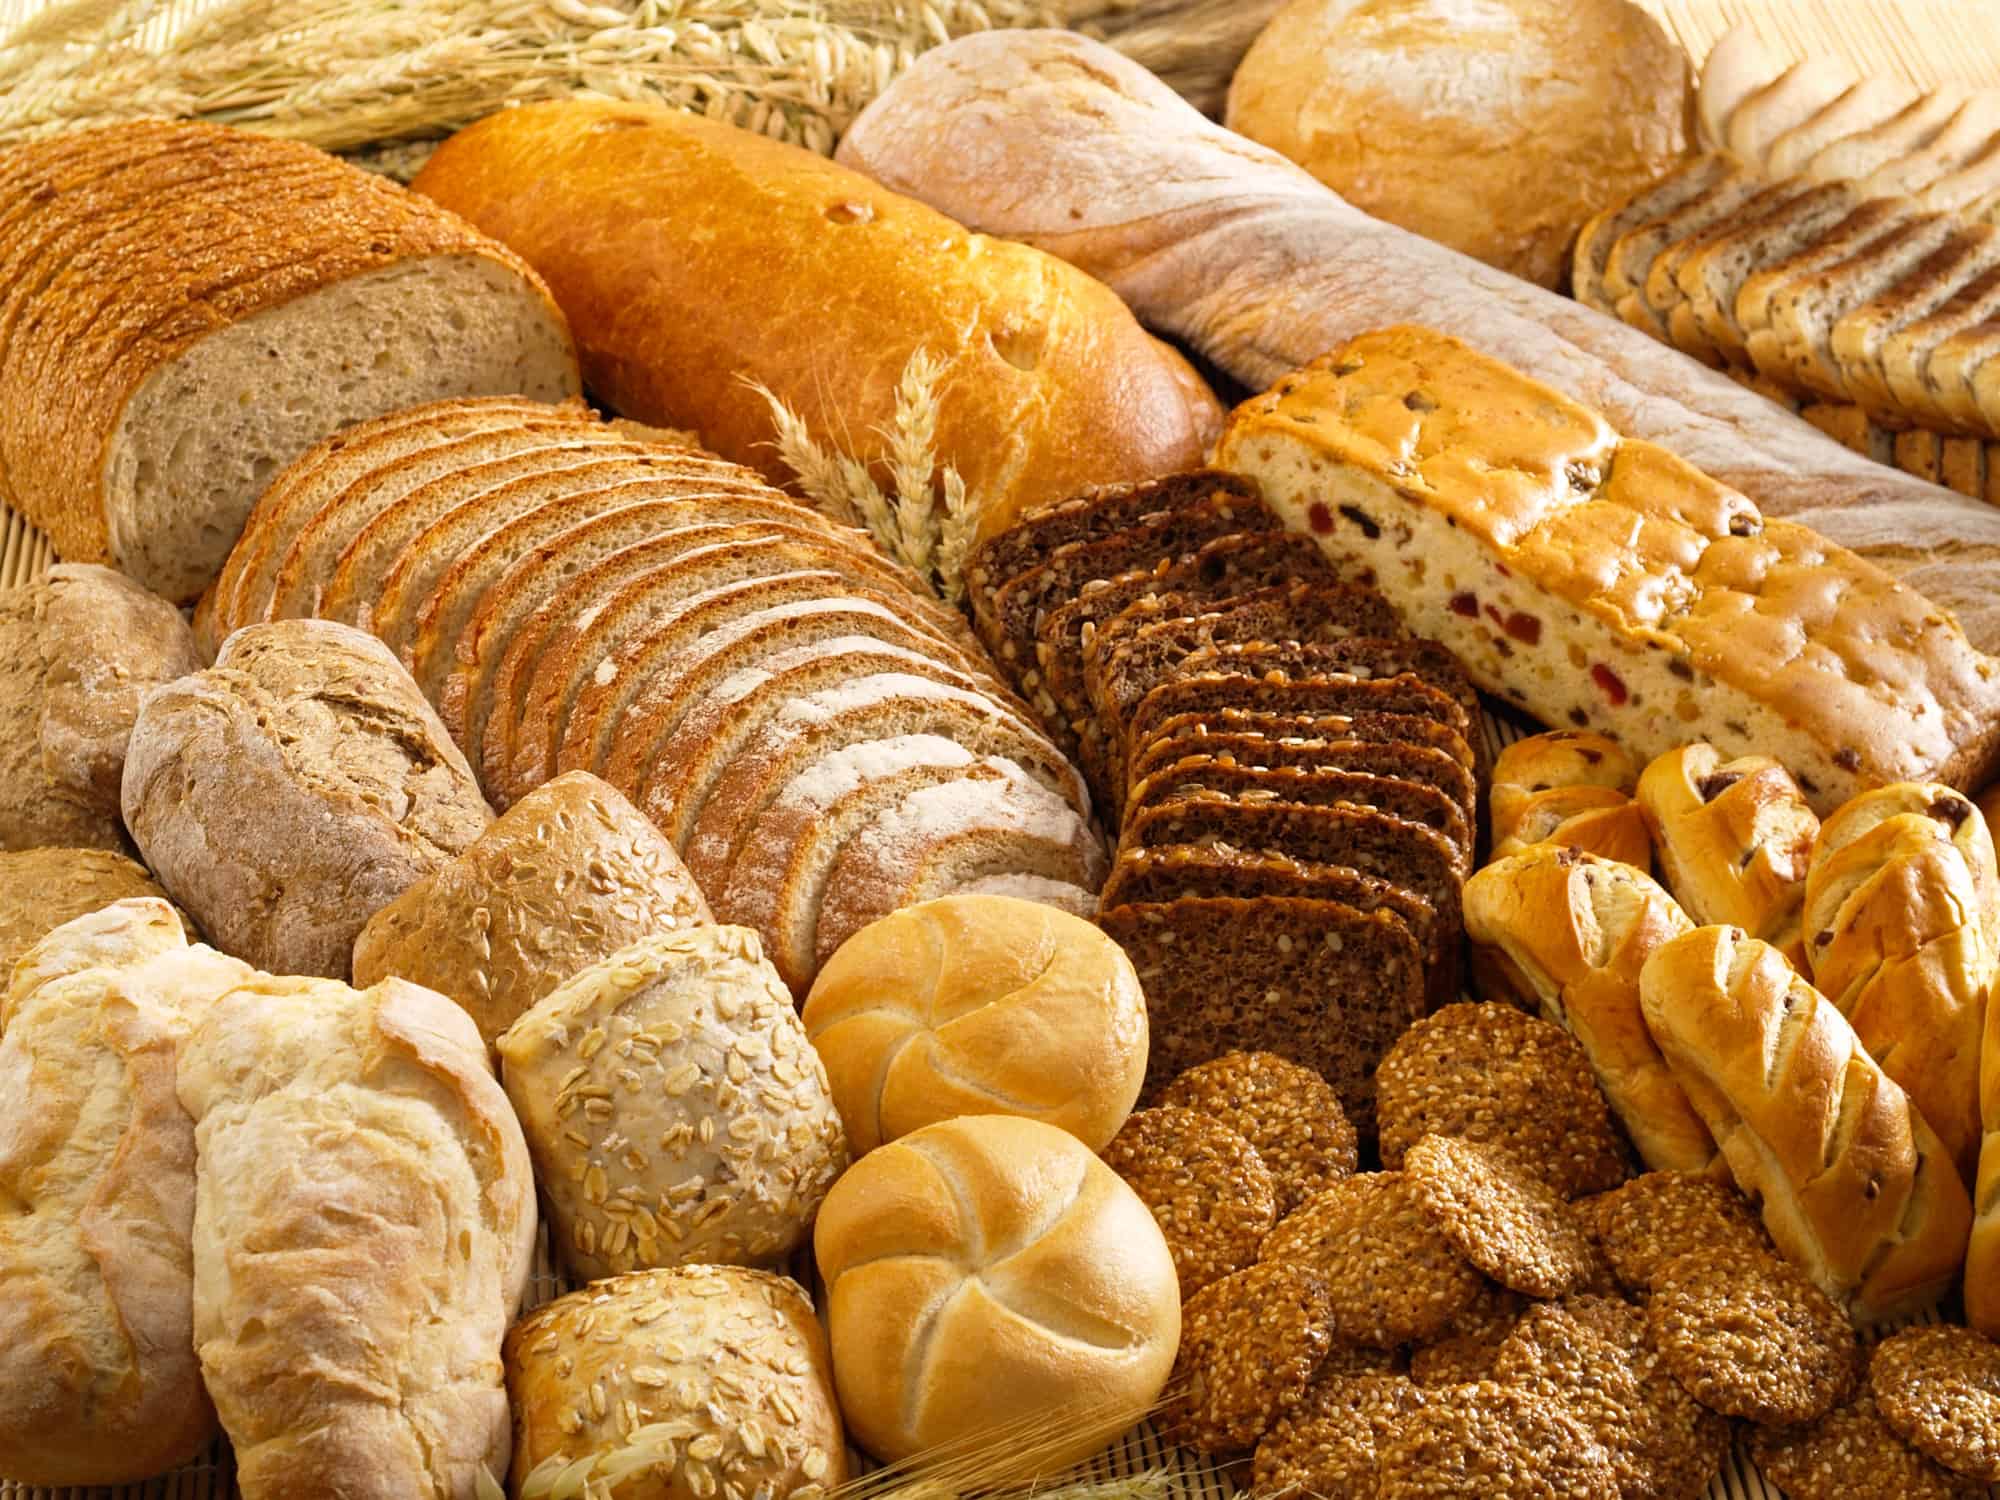 Arrangement with bakery products